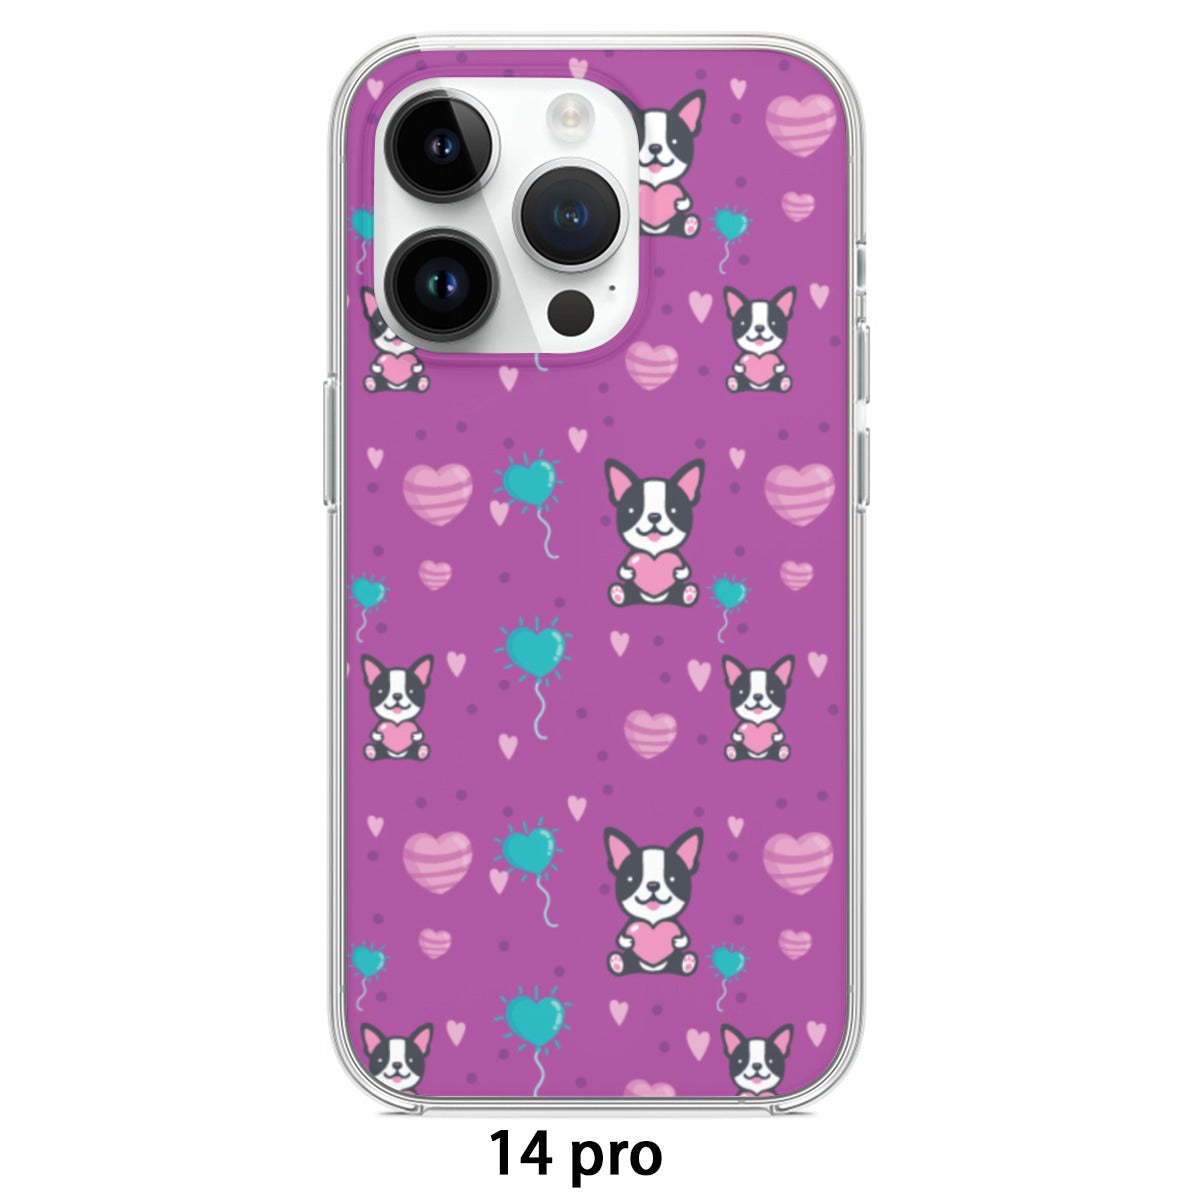 Georgia - iPhone case for Boston Terrier lovers